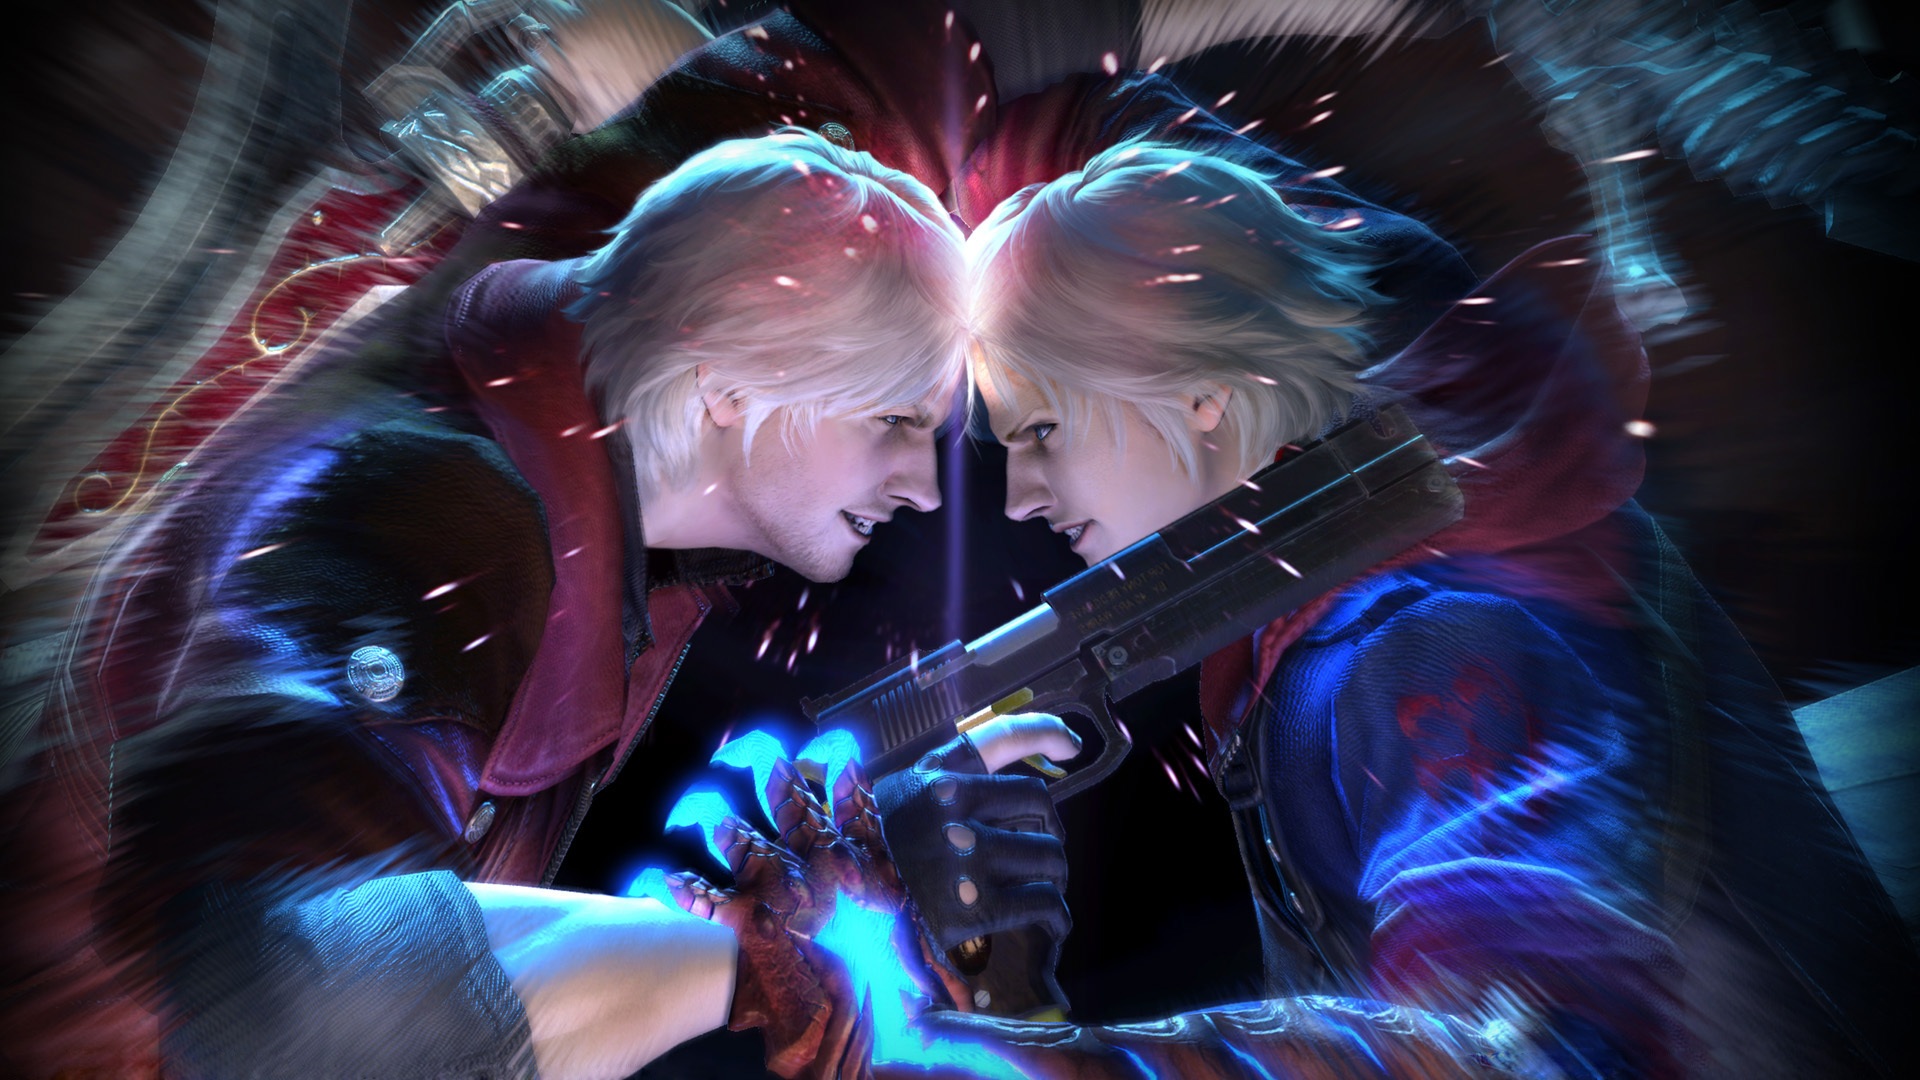  wallpapers of Devil May Cry 4 You are downloading Devil May Cry 4